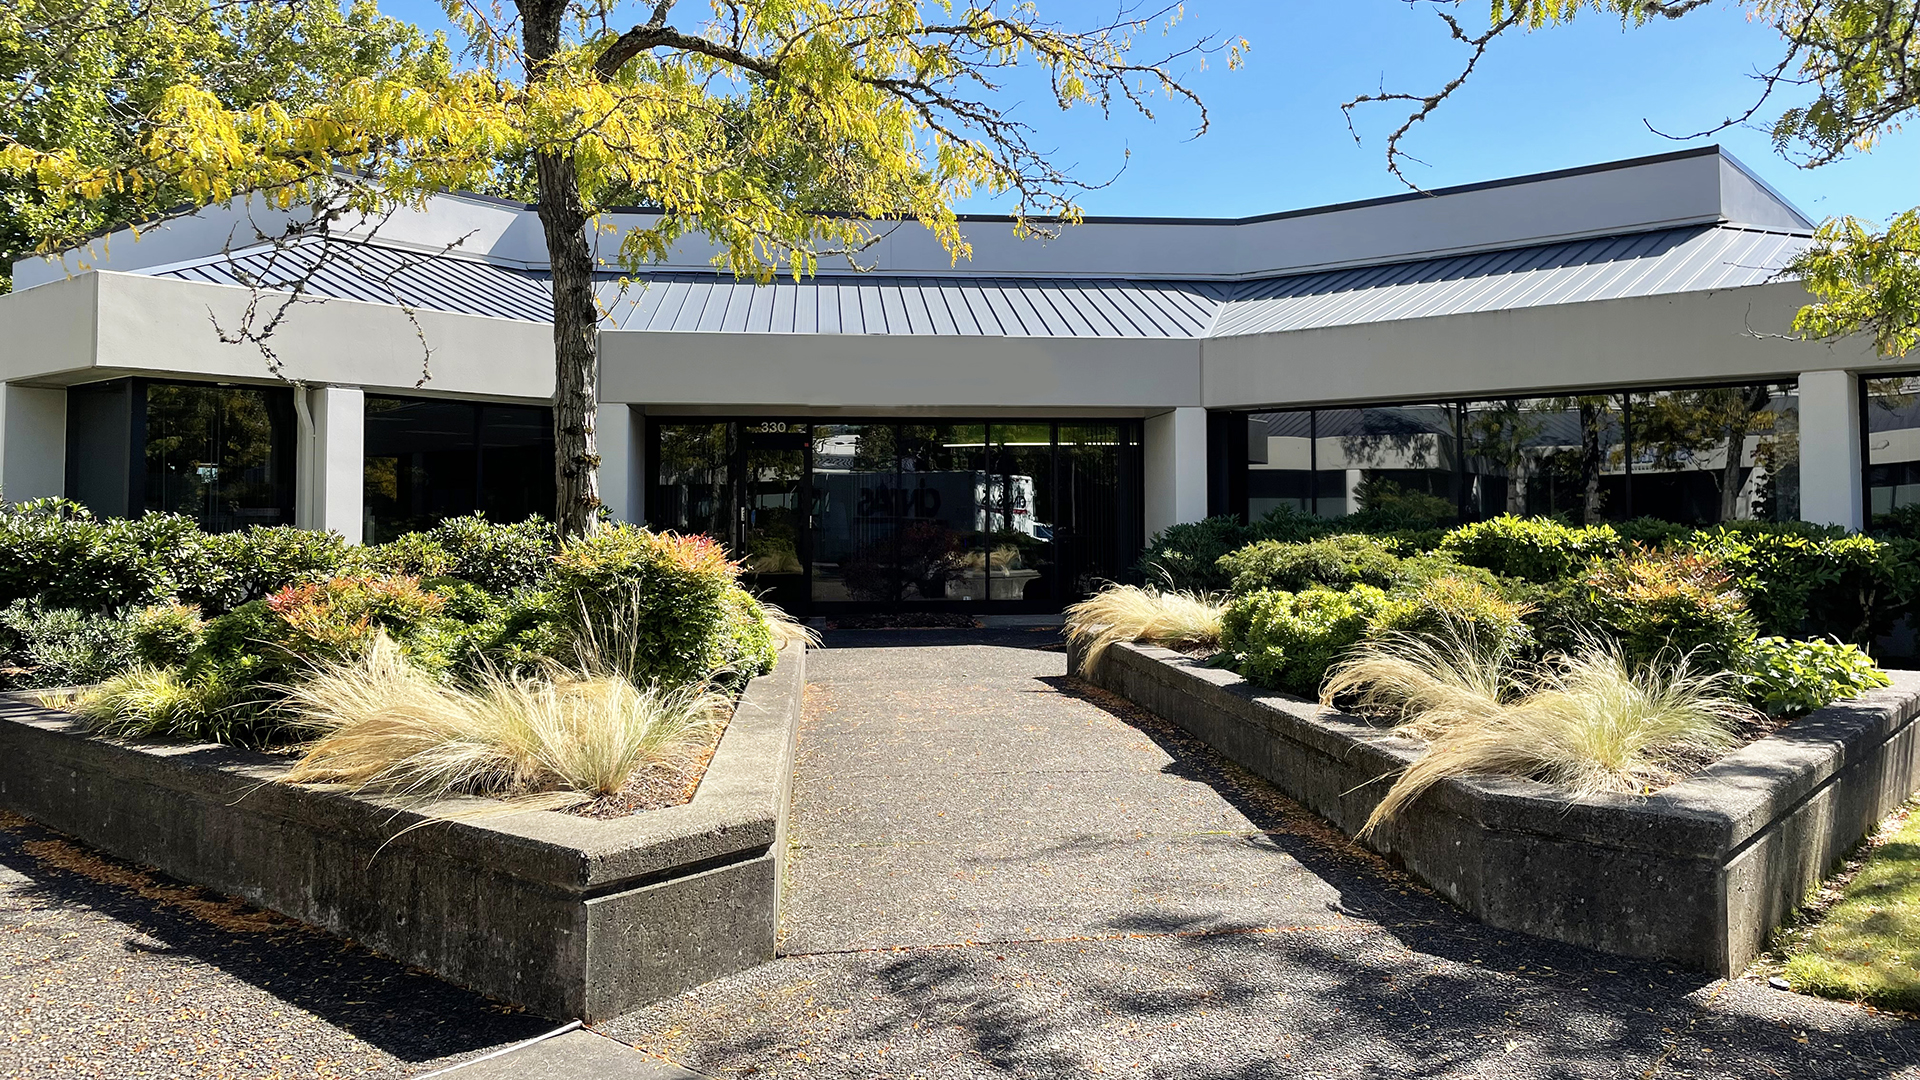 Sublease at 1600 NW 167th Pl, Beaverton, OR 97006